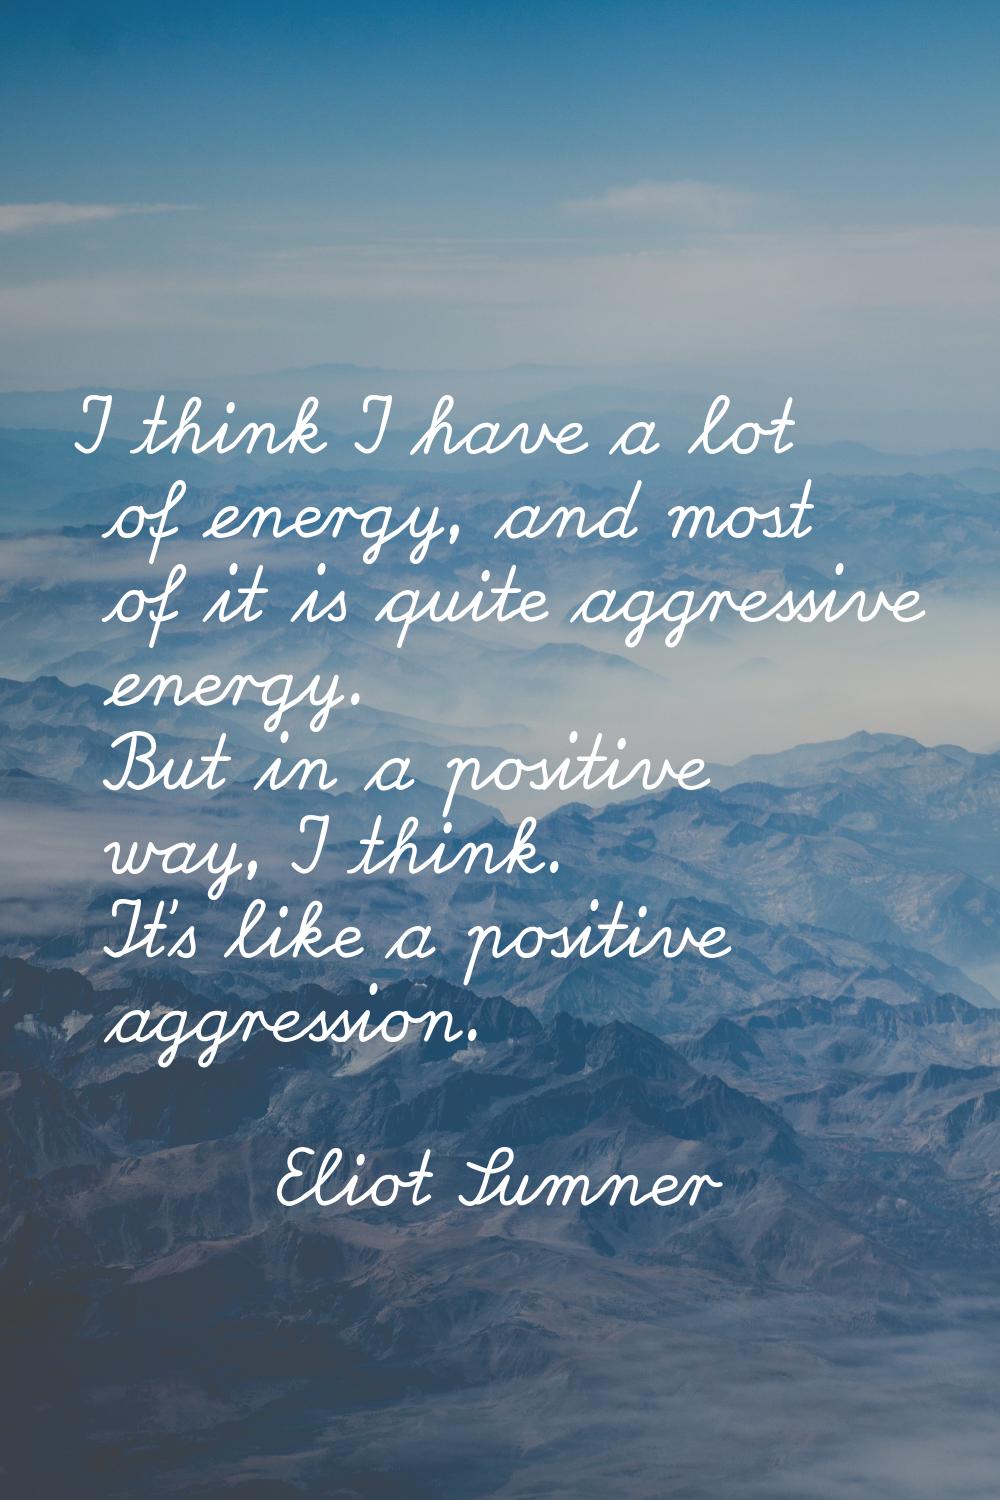 I think I have a lot of energy, and most of it is quite aggressive energy. But in a positive way, I